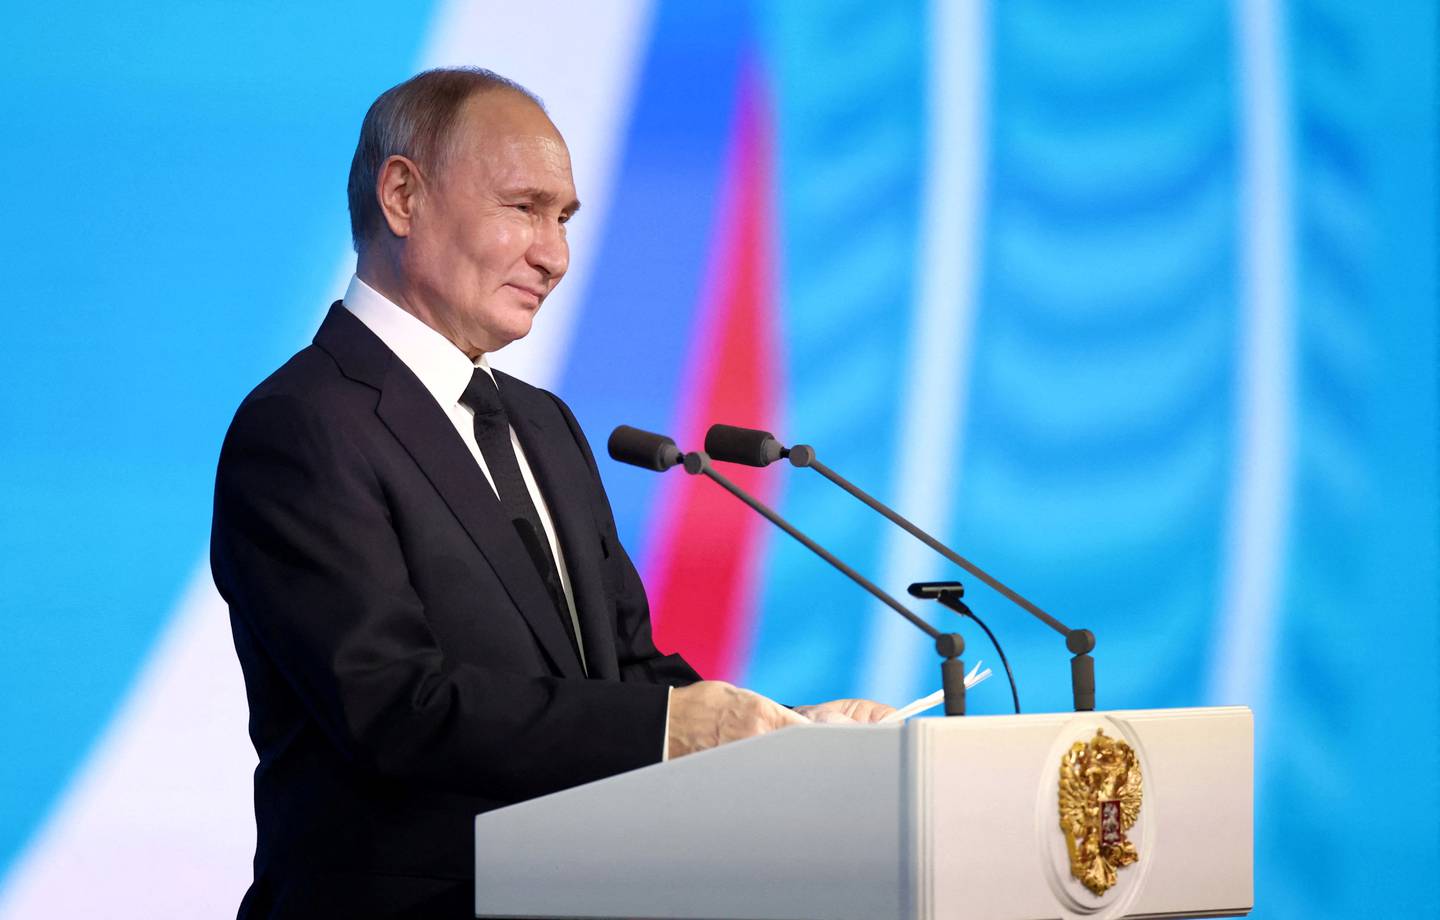 In this pool photograph distributed by Russian state owned agency Sputnik, Russian President Vladimir Putin speaks during an event marking the 50th anniversary of the launch of the Baikal-Amur Mainline (BAM) construction, at the State Kremlin Palace in Moscow, on April 23, 2024. (Photo by Valery SHARIFULIN / POOL / AFP) / ** Editor's note : this image is distributed by Russian state owned agency Sputnik **